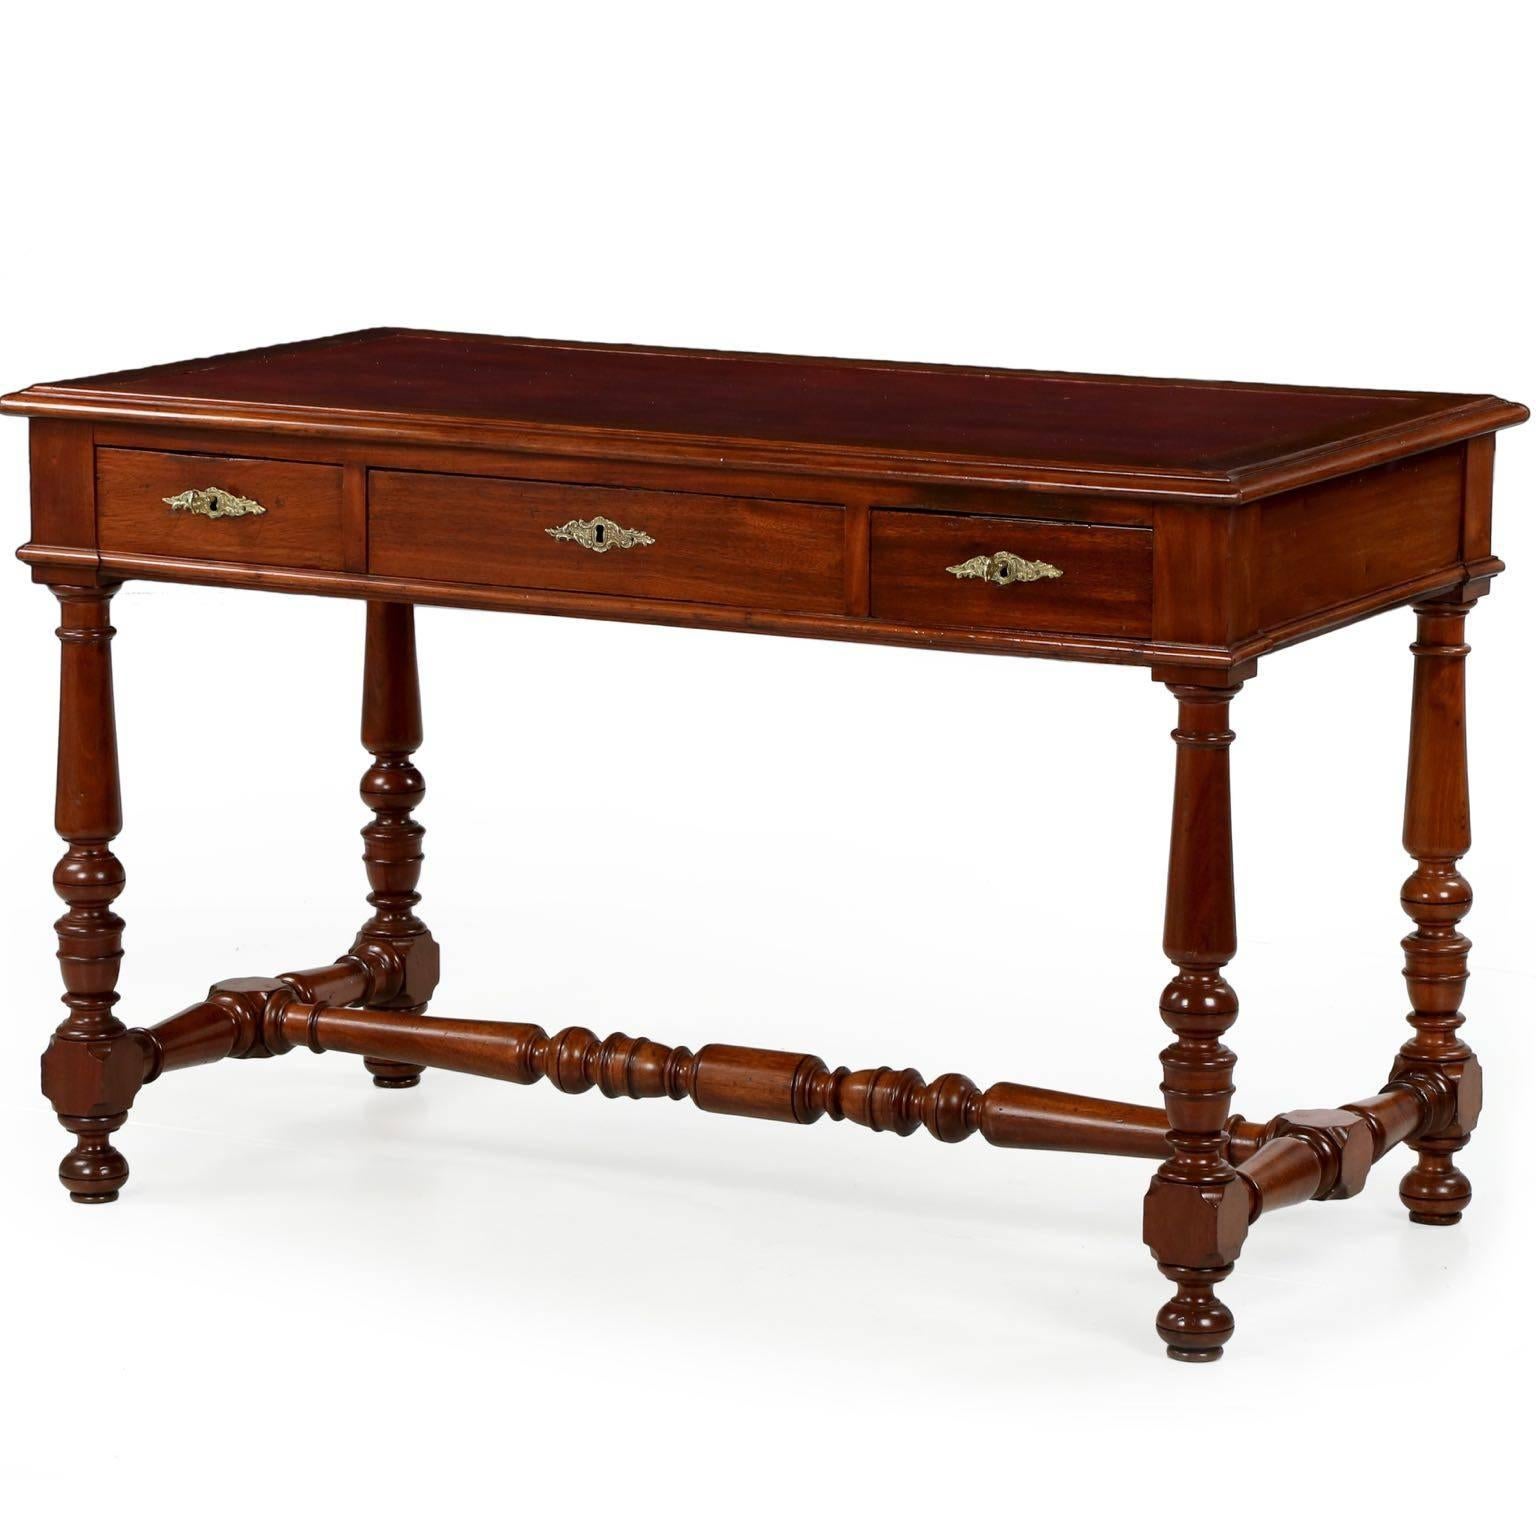 English William and Mary Style Antique Writing Desk W/ Leather Top, circa 1900